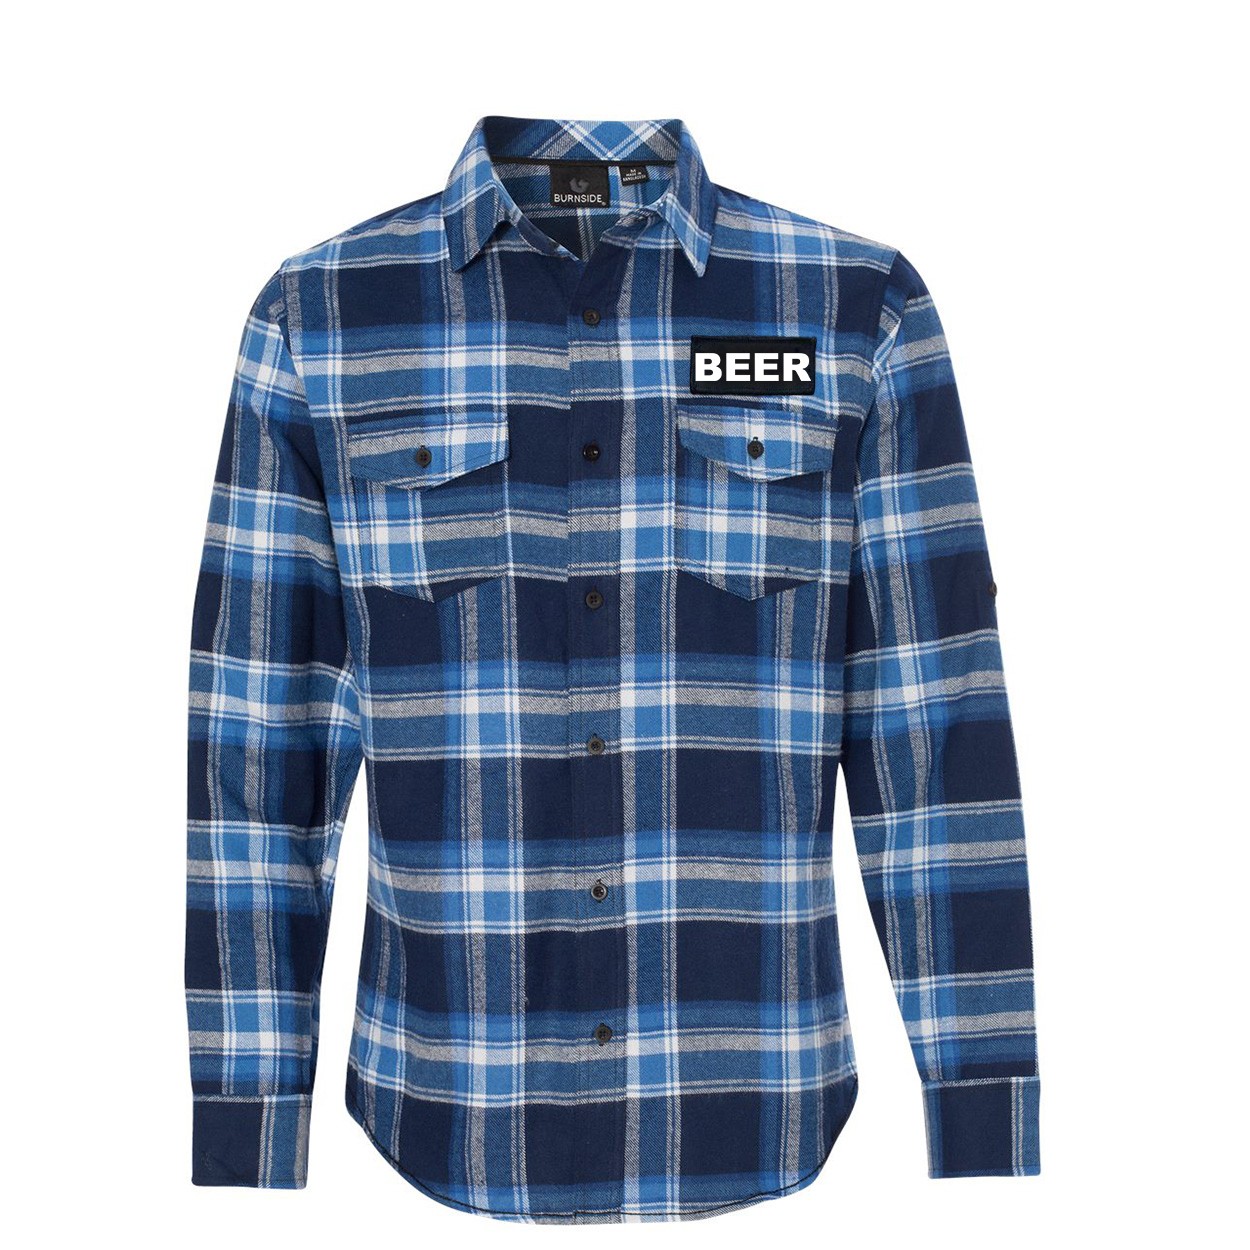 Beer Brand Logo Night Out Rectangle Woven Patch Flannel Shirt Long Sleeve Blue/White (White Logo)